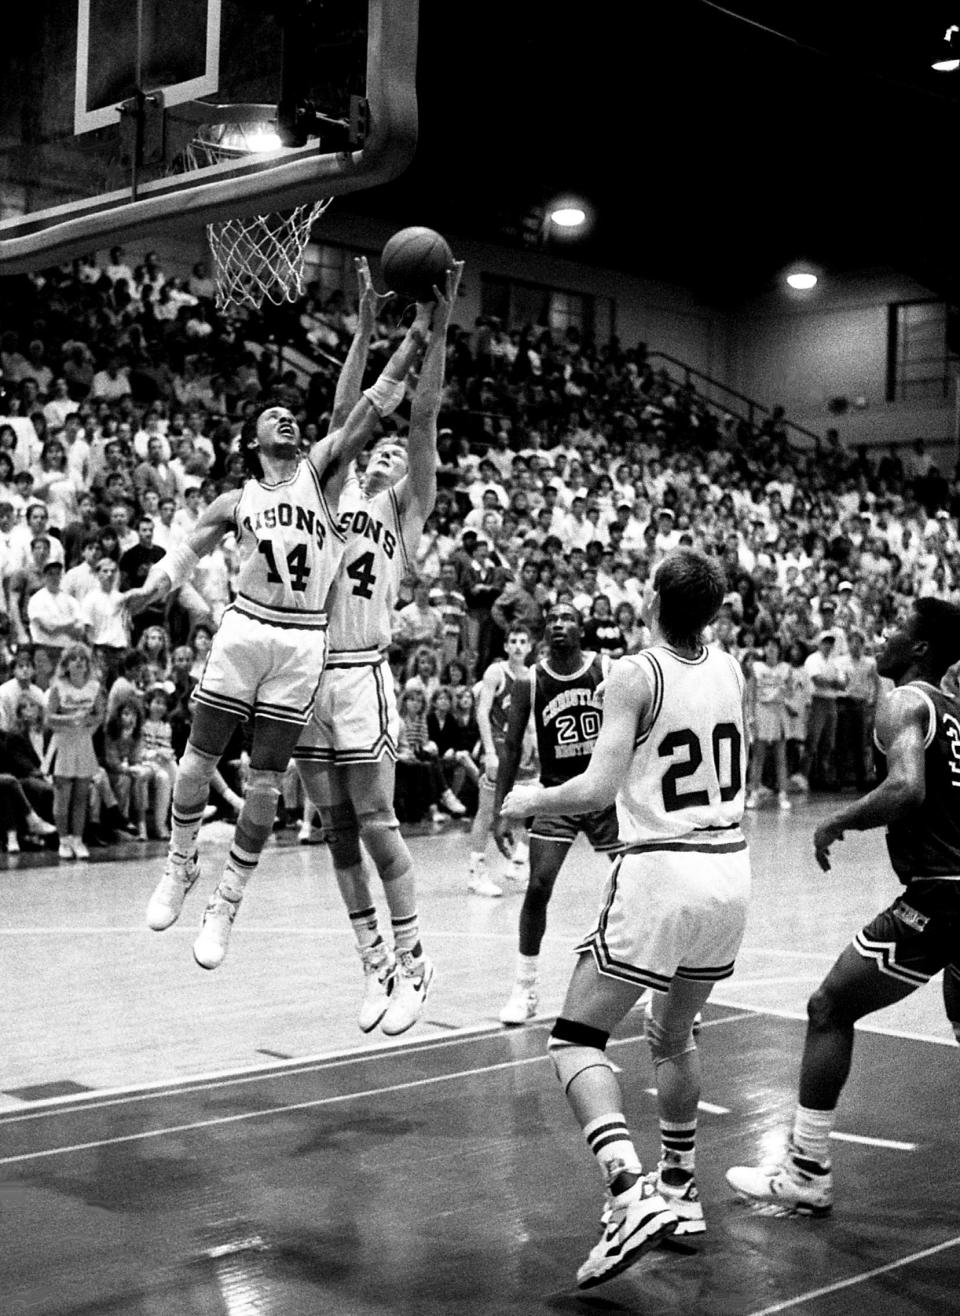 David Lipscomb teammates Marcus Bodie (14) and Philip Hutcheson battle for a rebound as the nation’s No. 1-ranked NAIA team defeated Christian Brothers of Memphis 103-91 before 3,300 at McQuiddy Gym on Feb. 2, 1989, to extend its winning streak to 31 games.